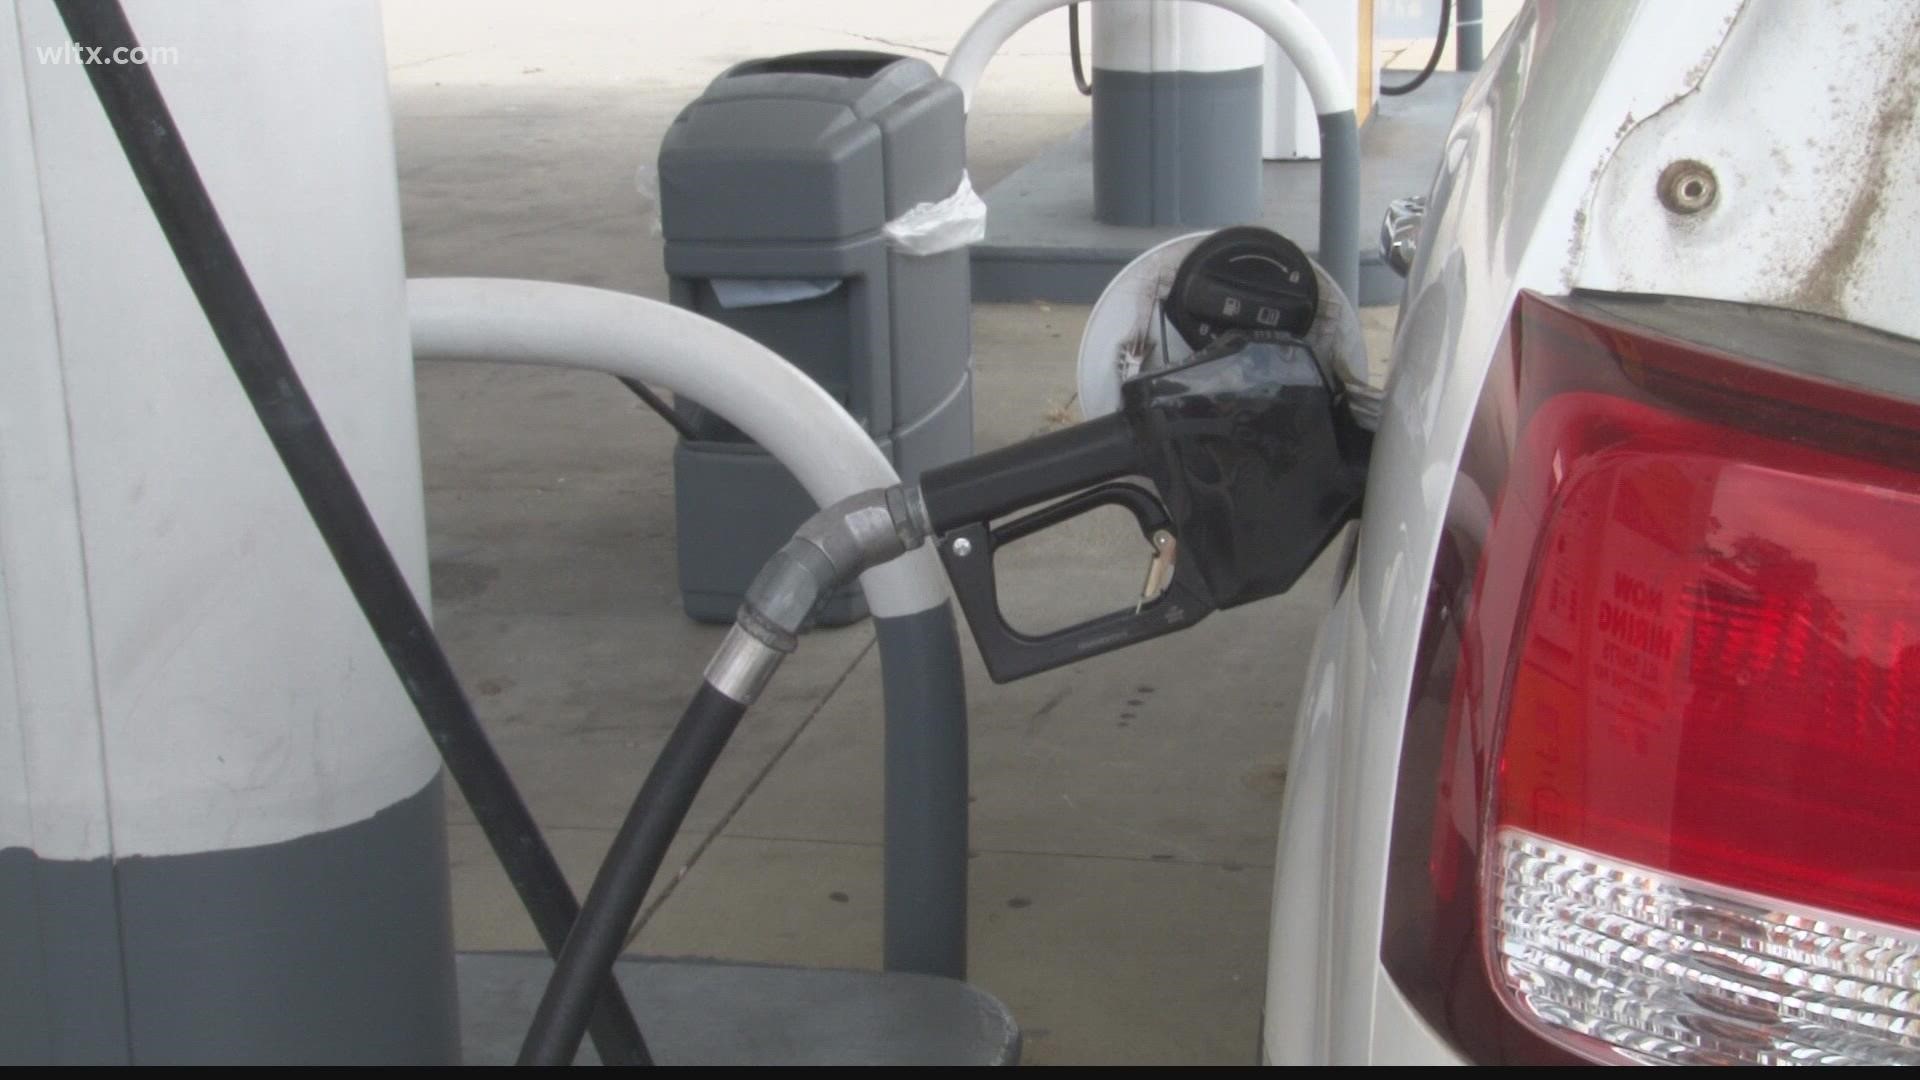 A local mechanic talks about how you can save money driving your car as gas prices soar.